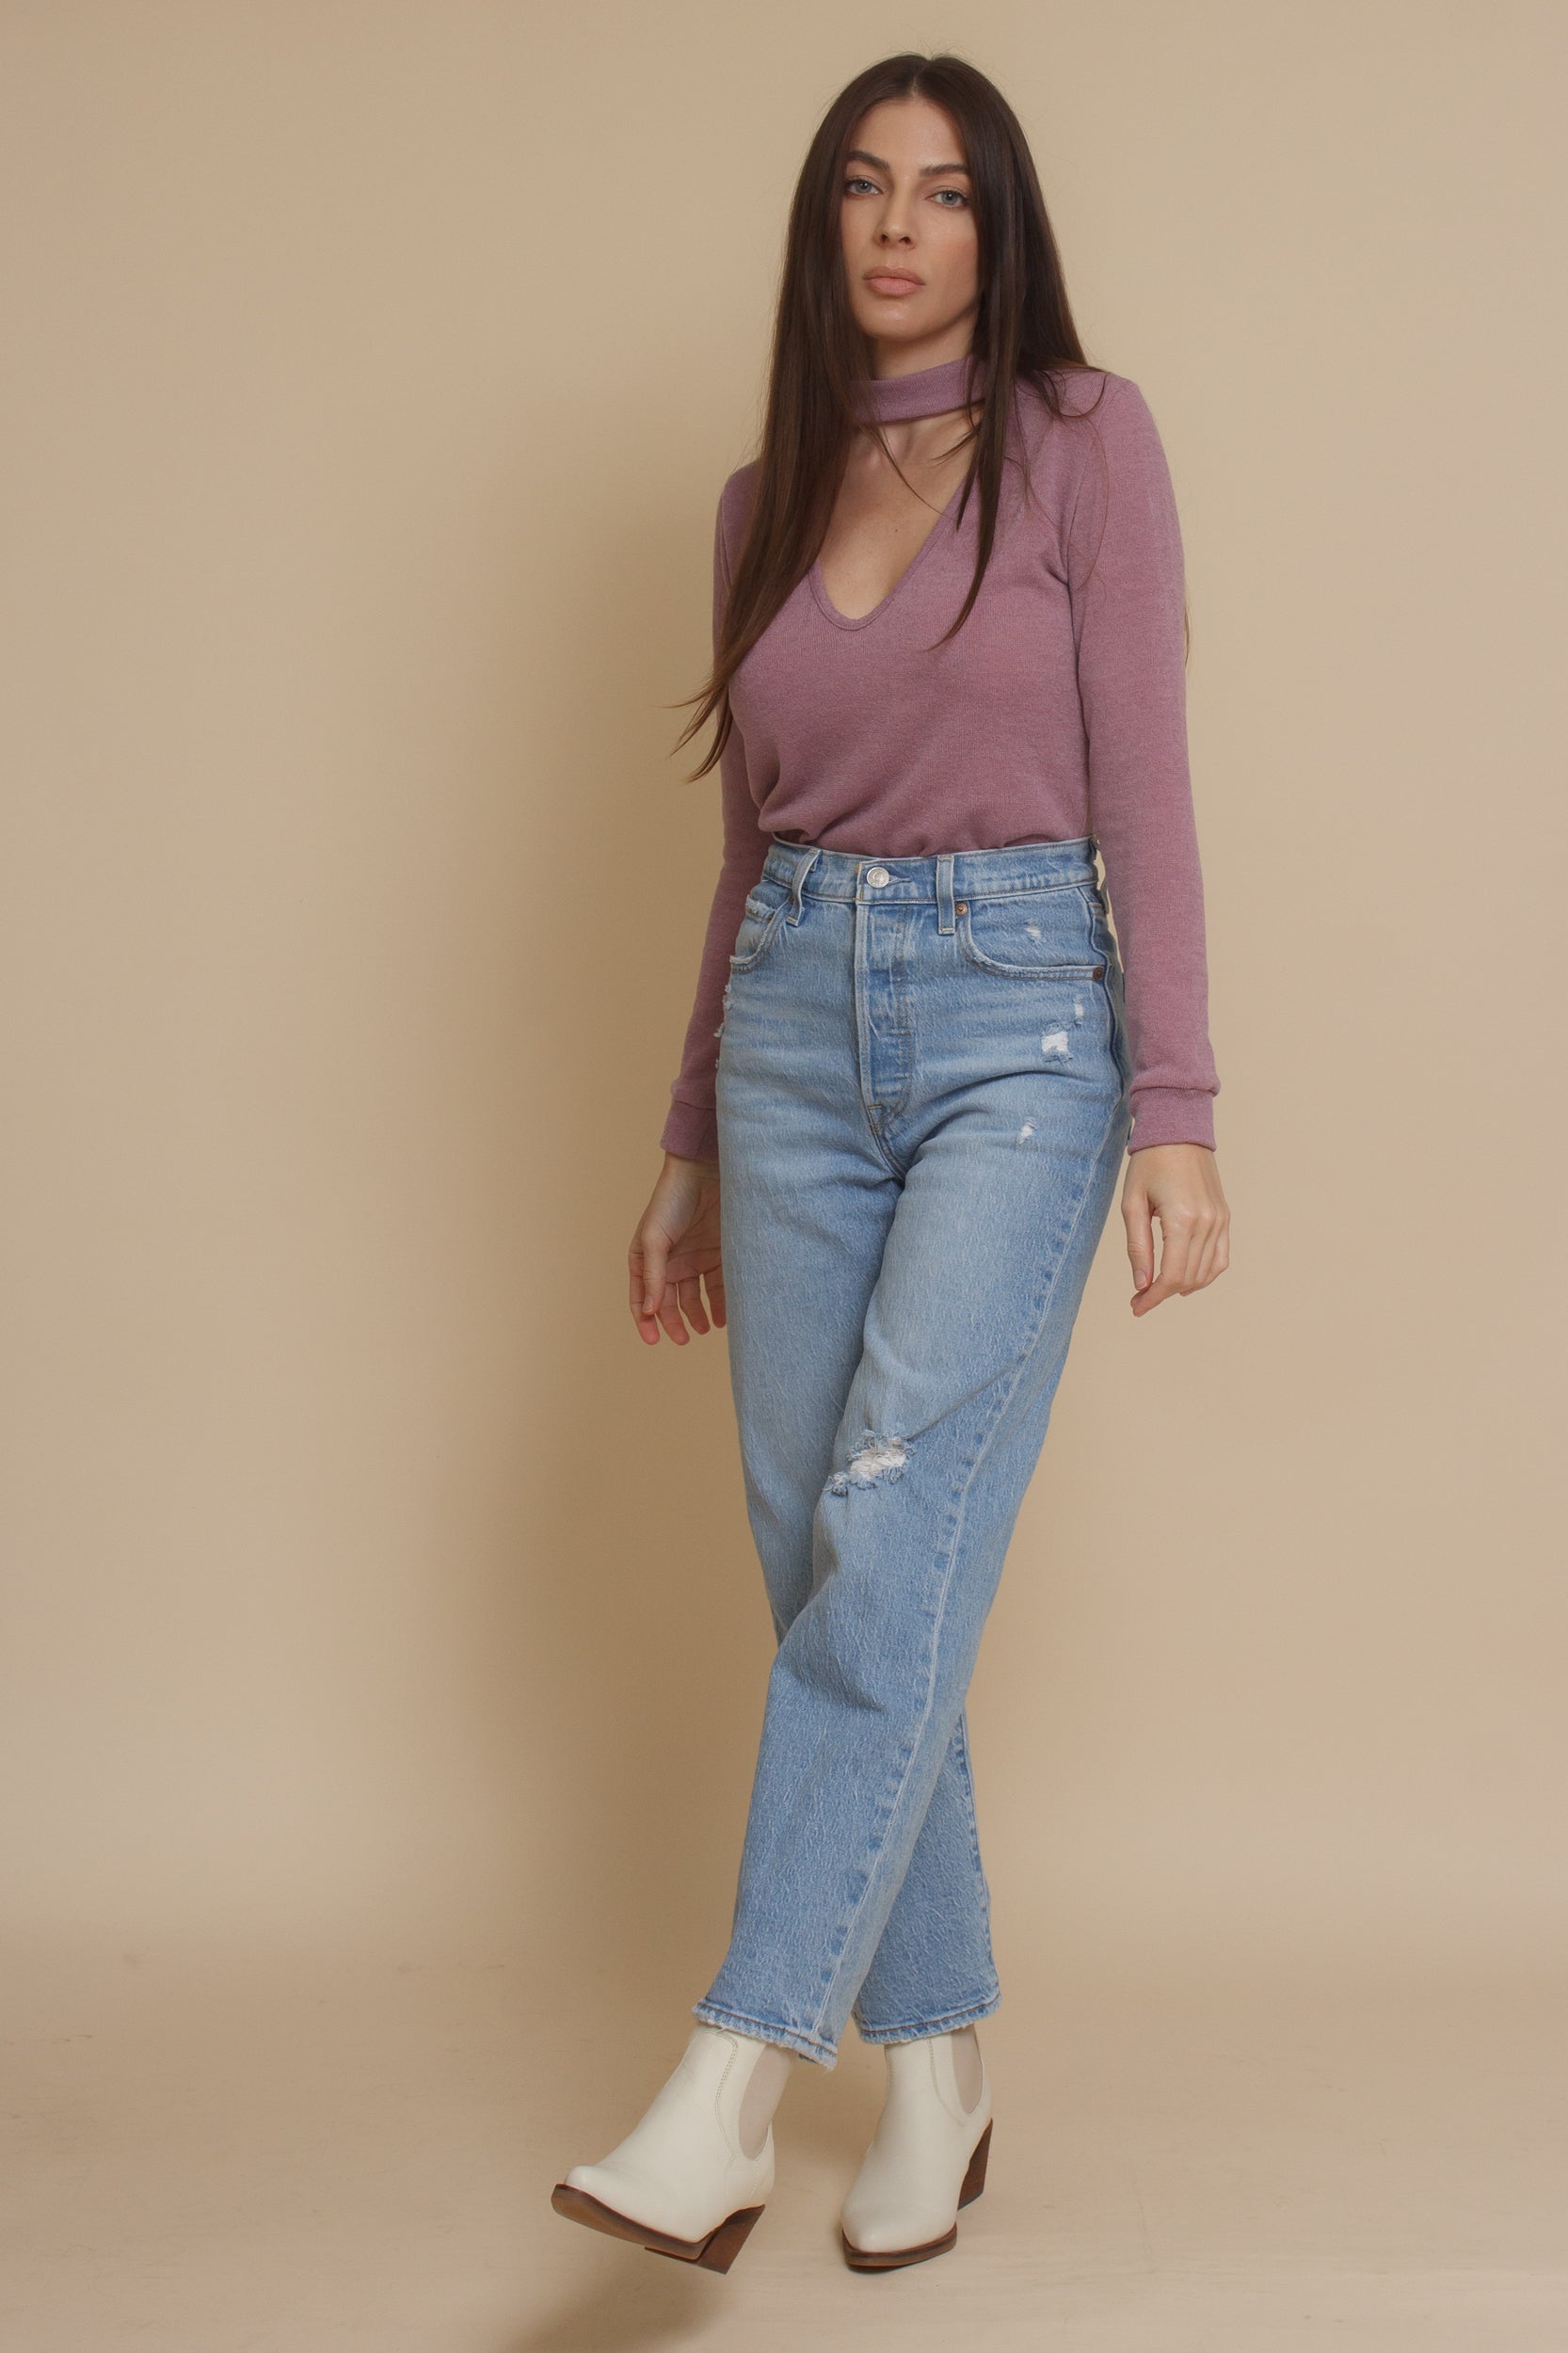 Knit top with choker cut out neckline, in mauve. Image 9